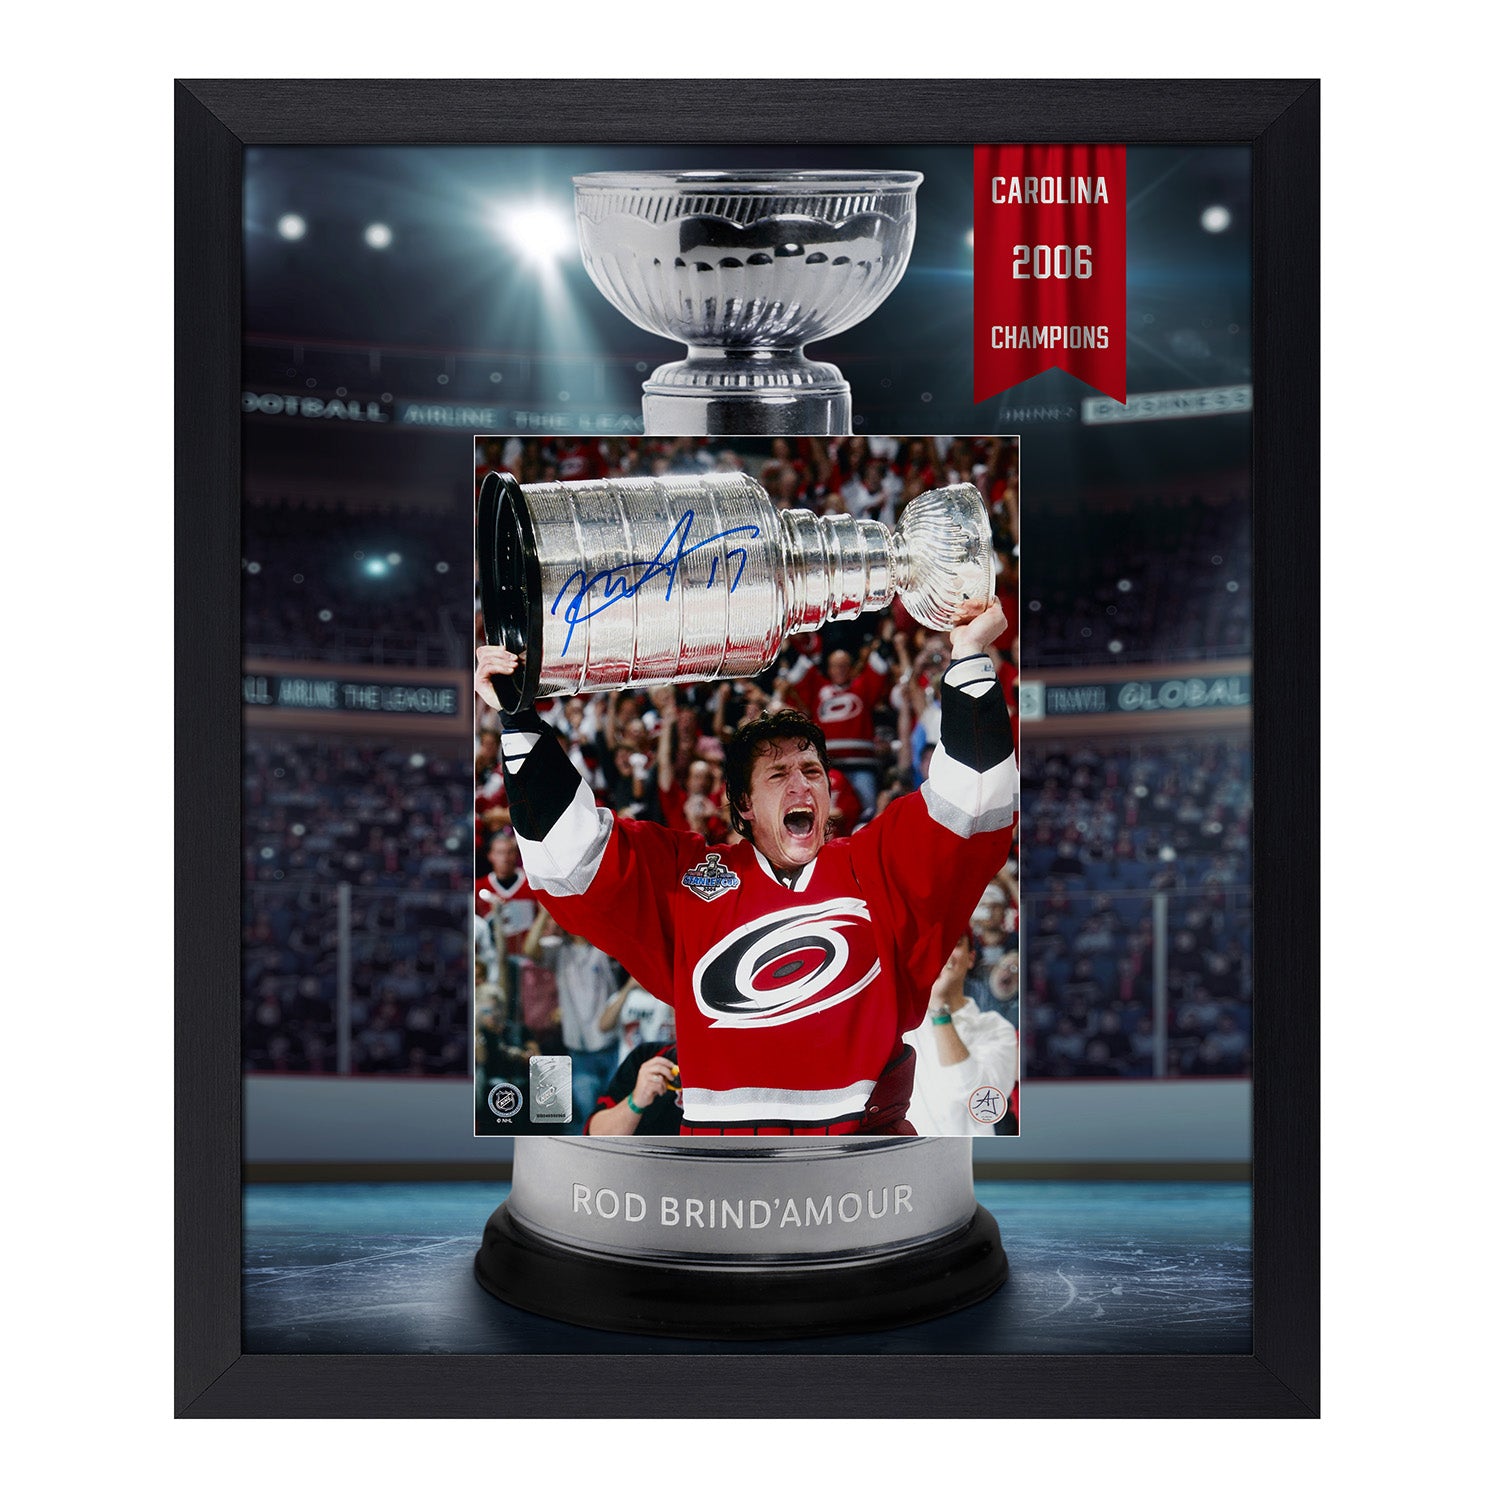 Rod Brind'Amour Signed Carolina Hurricanes Cup Champion Graphic 23x27 Frame